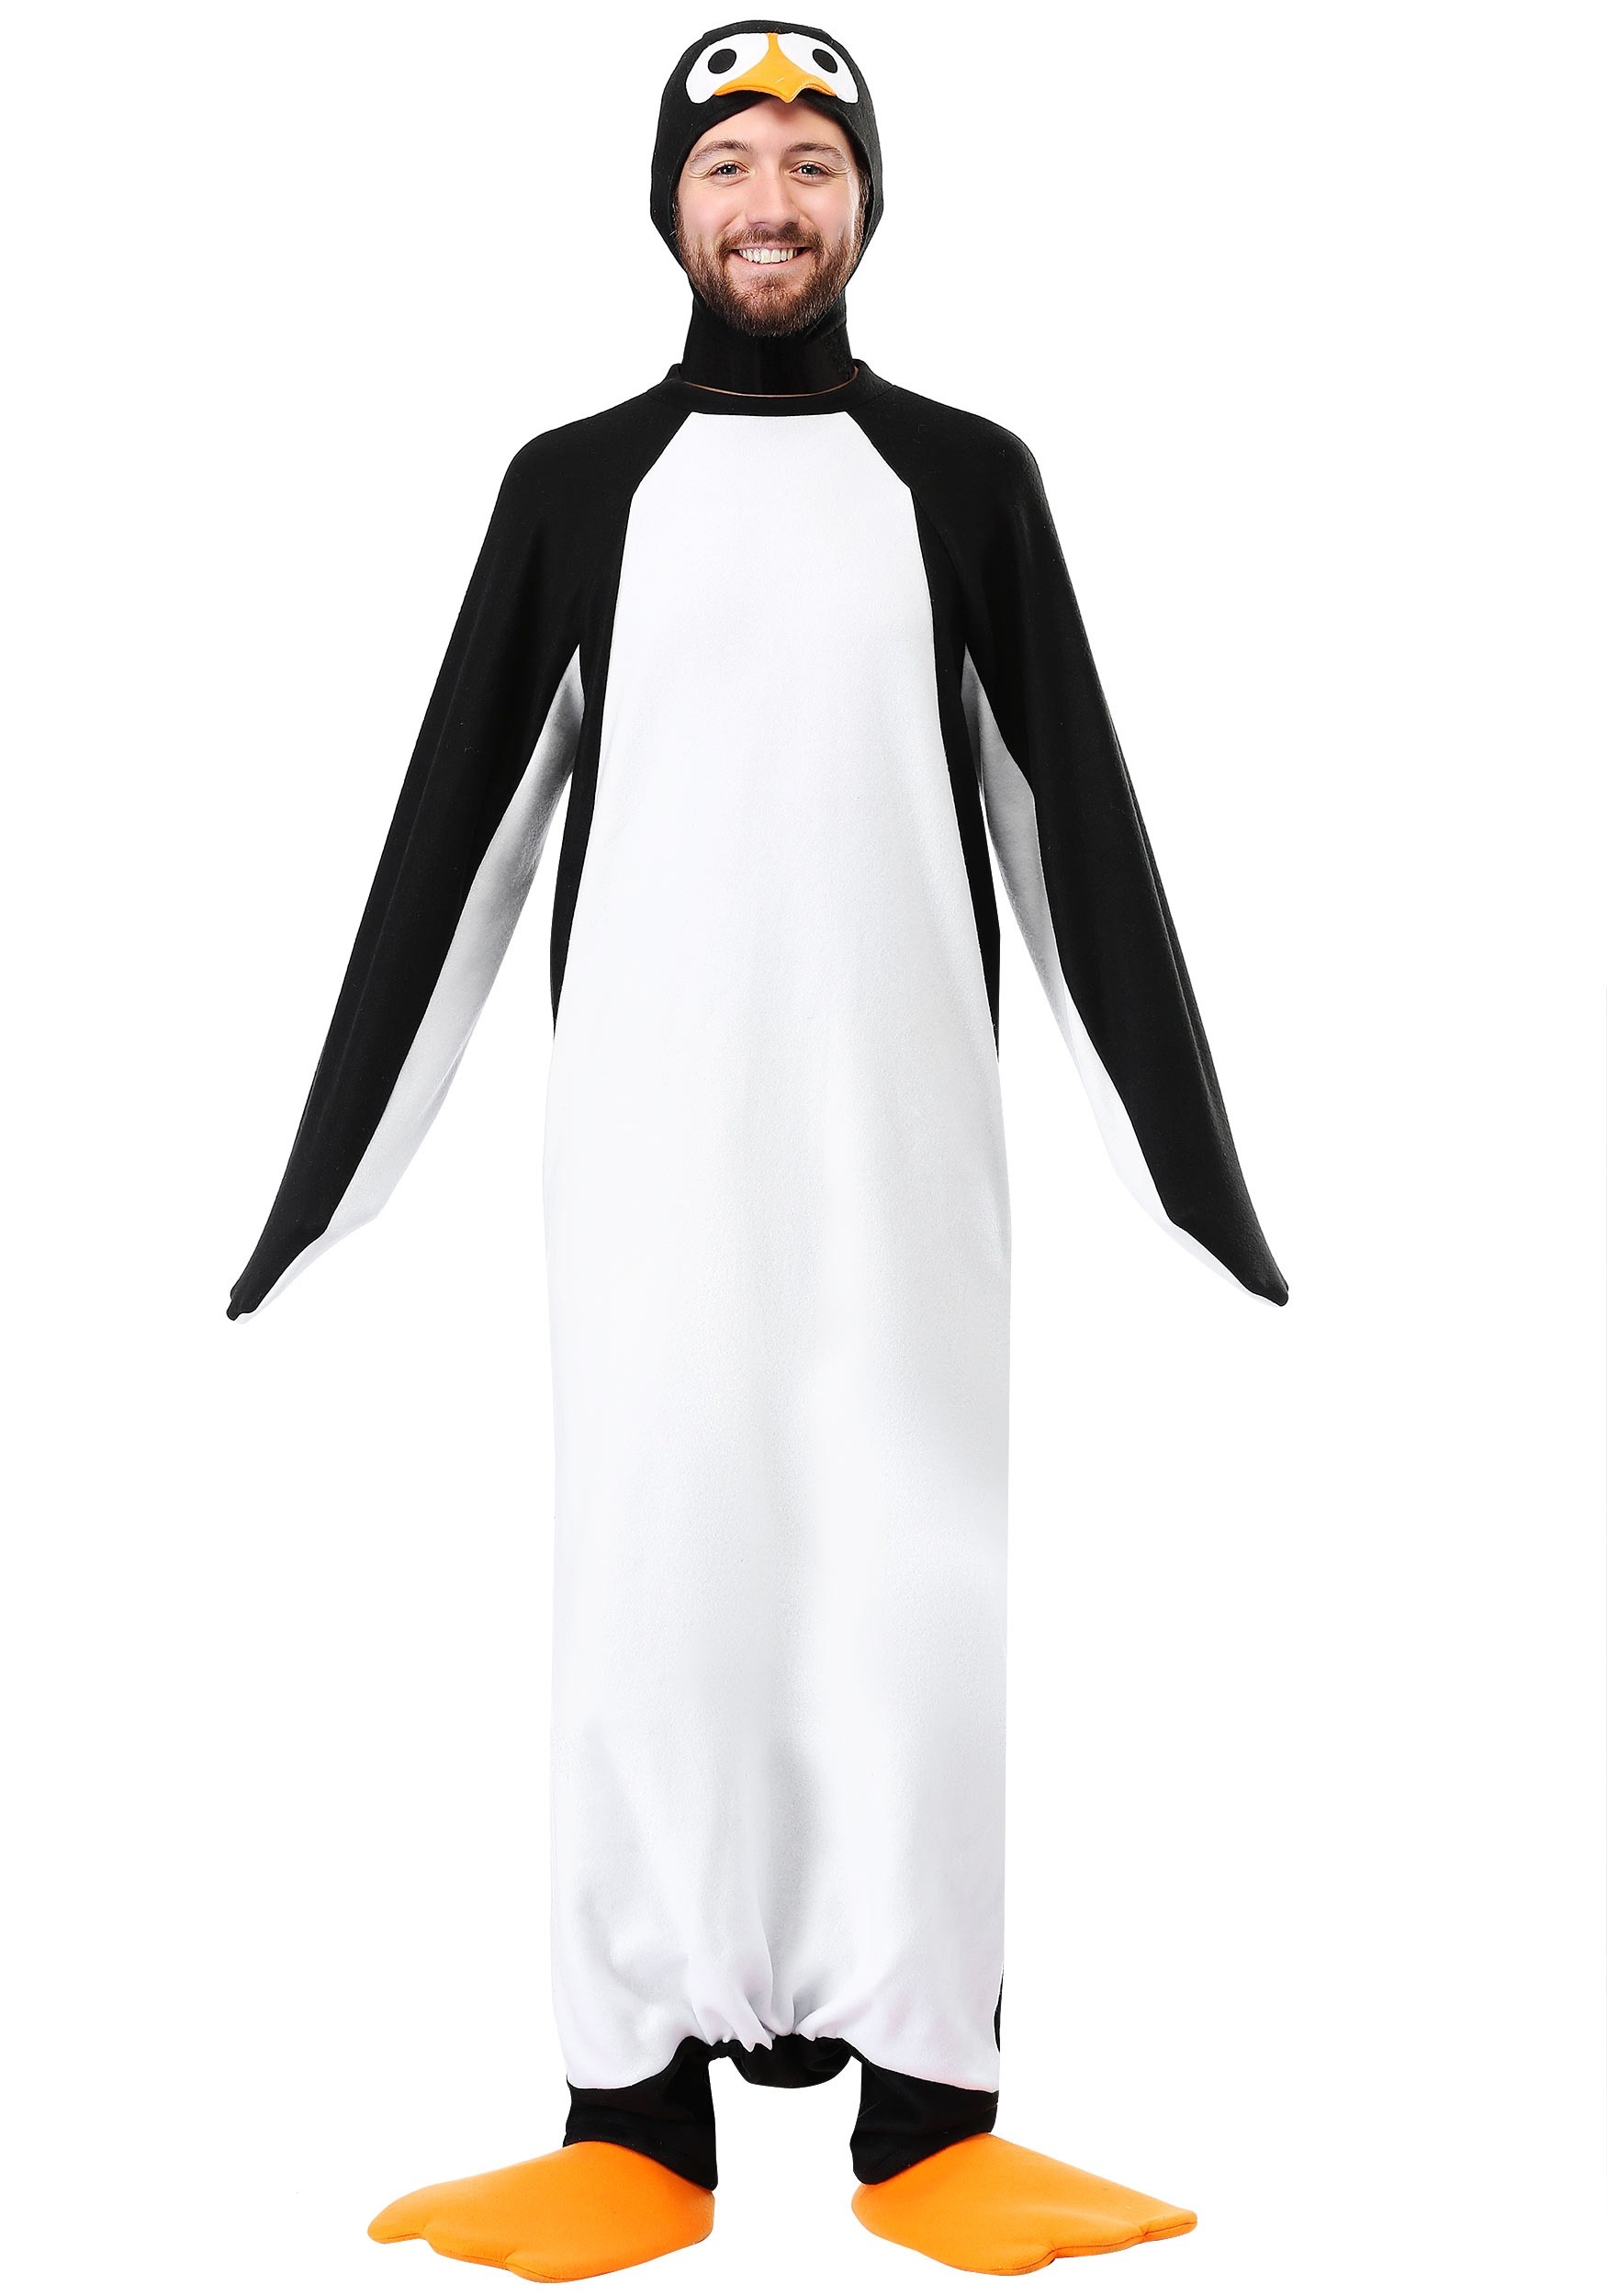 Photos - Fancy Dress Happy Japan FUN Costumes Happy Penguin Costume for Adults Black/White FUN2178AD 